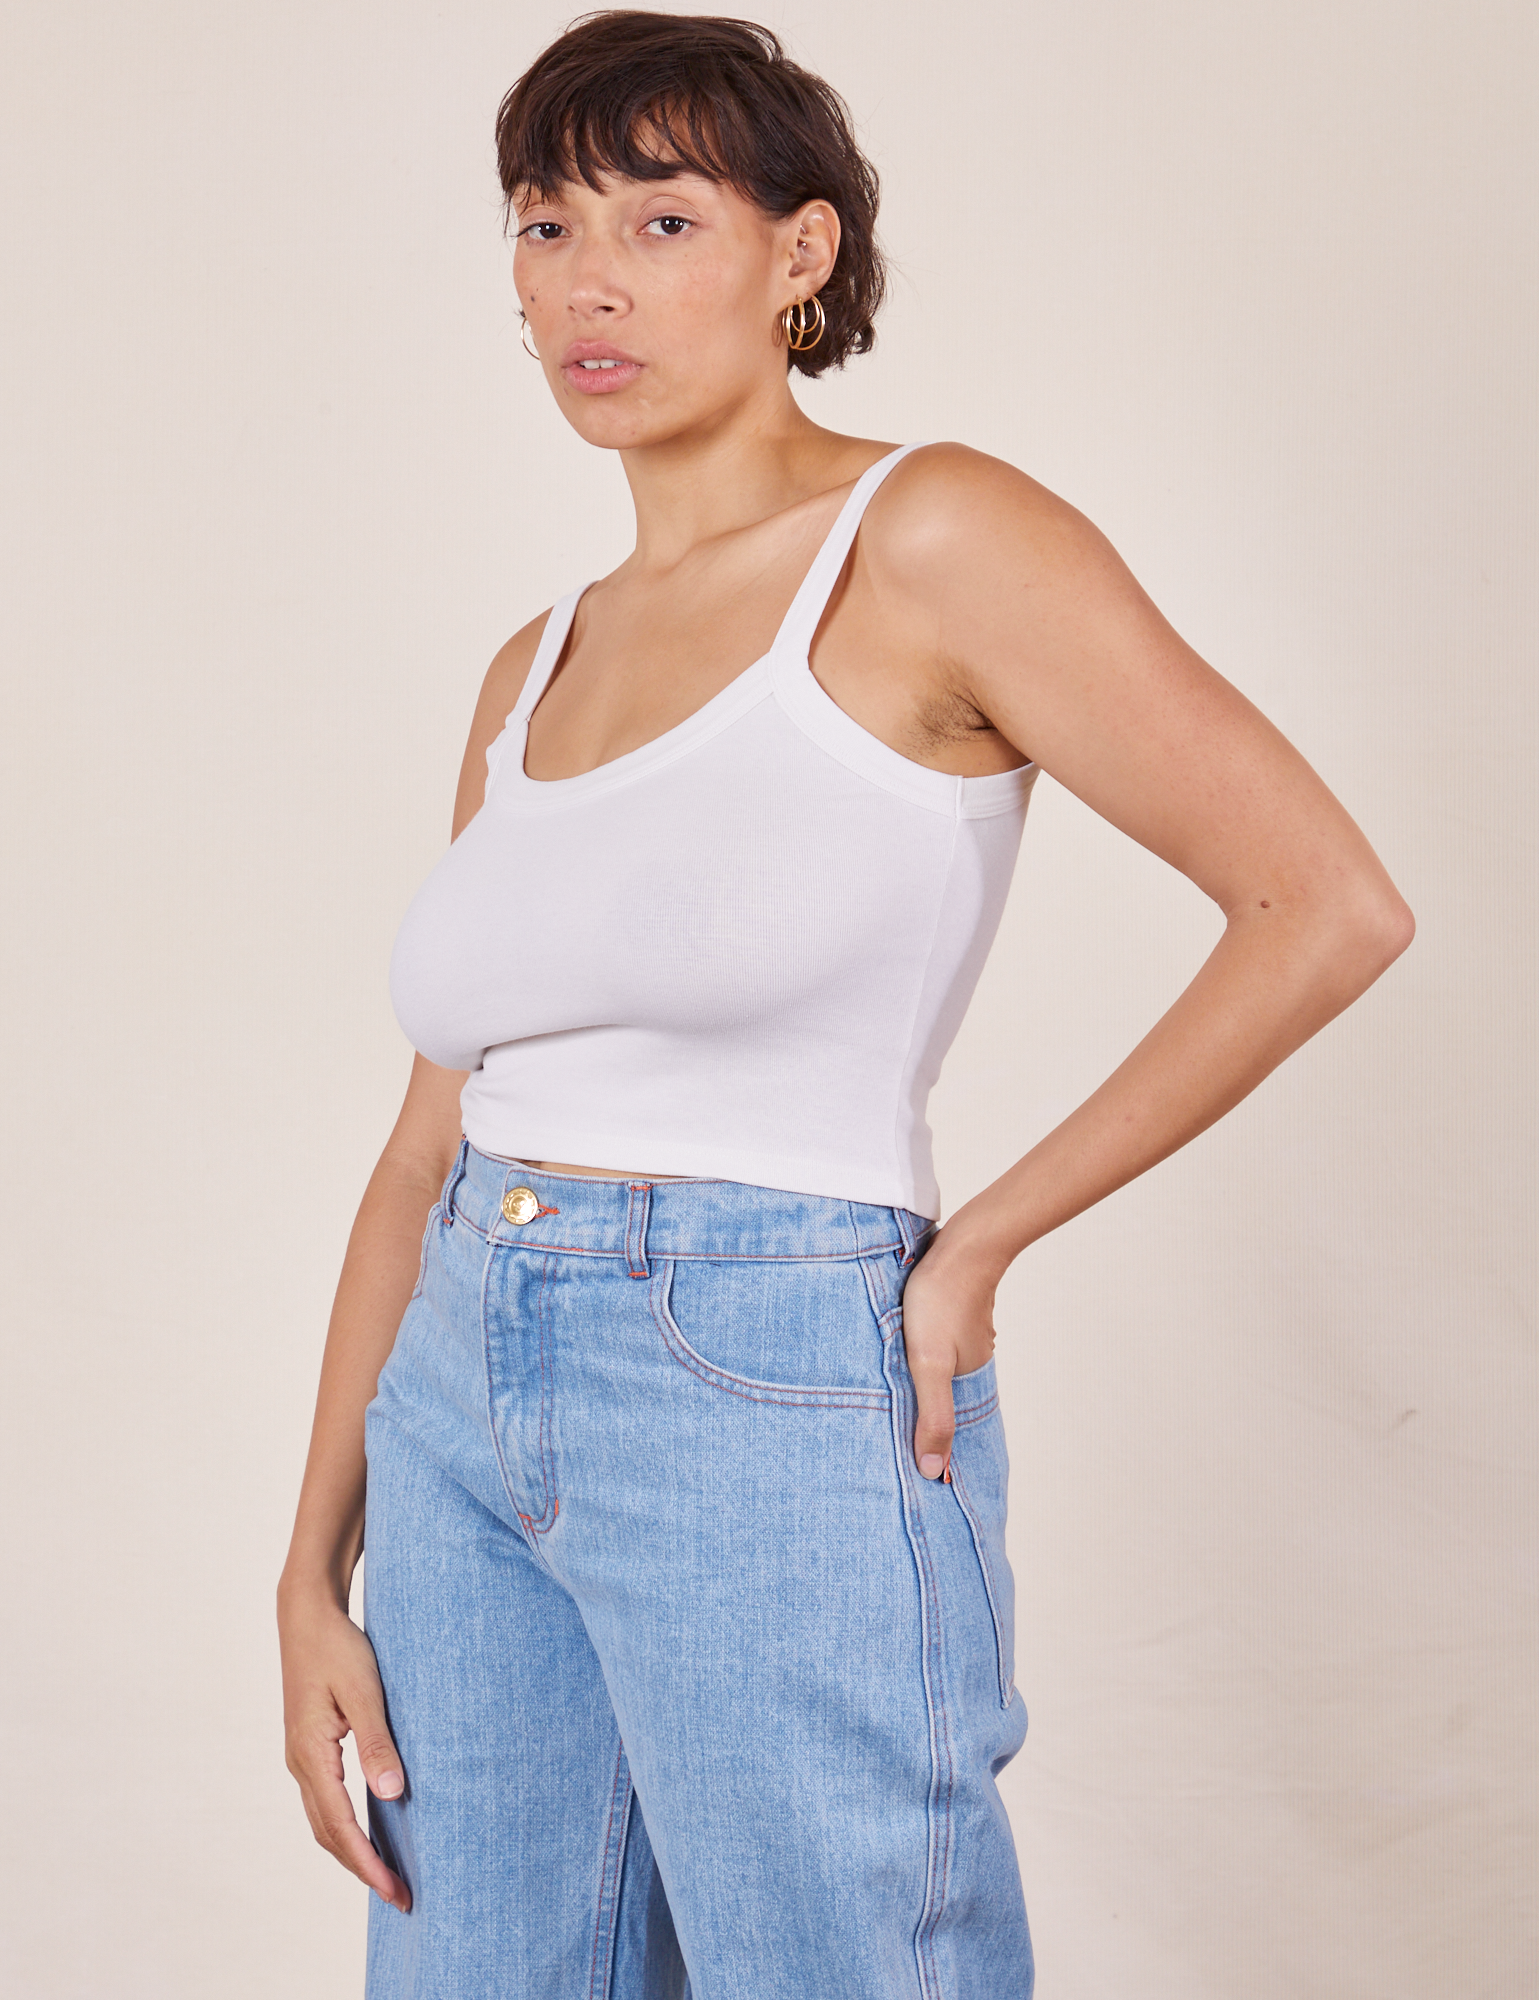 Tiara is 5'4" and wearing XS Cropped Cami in Vintage Tee Off-White paired with light wash Sailor Jeans